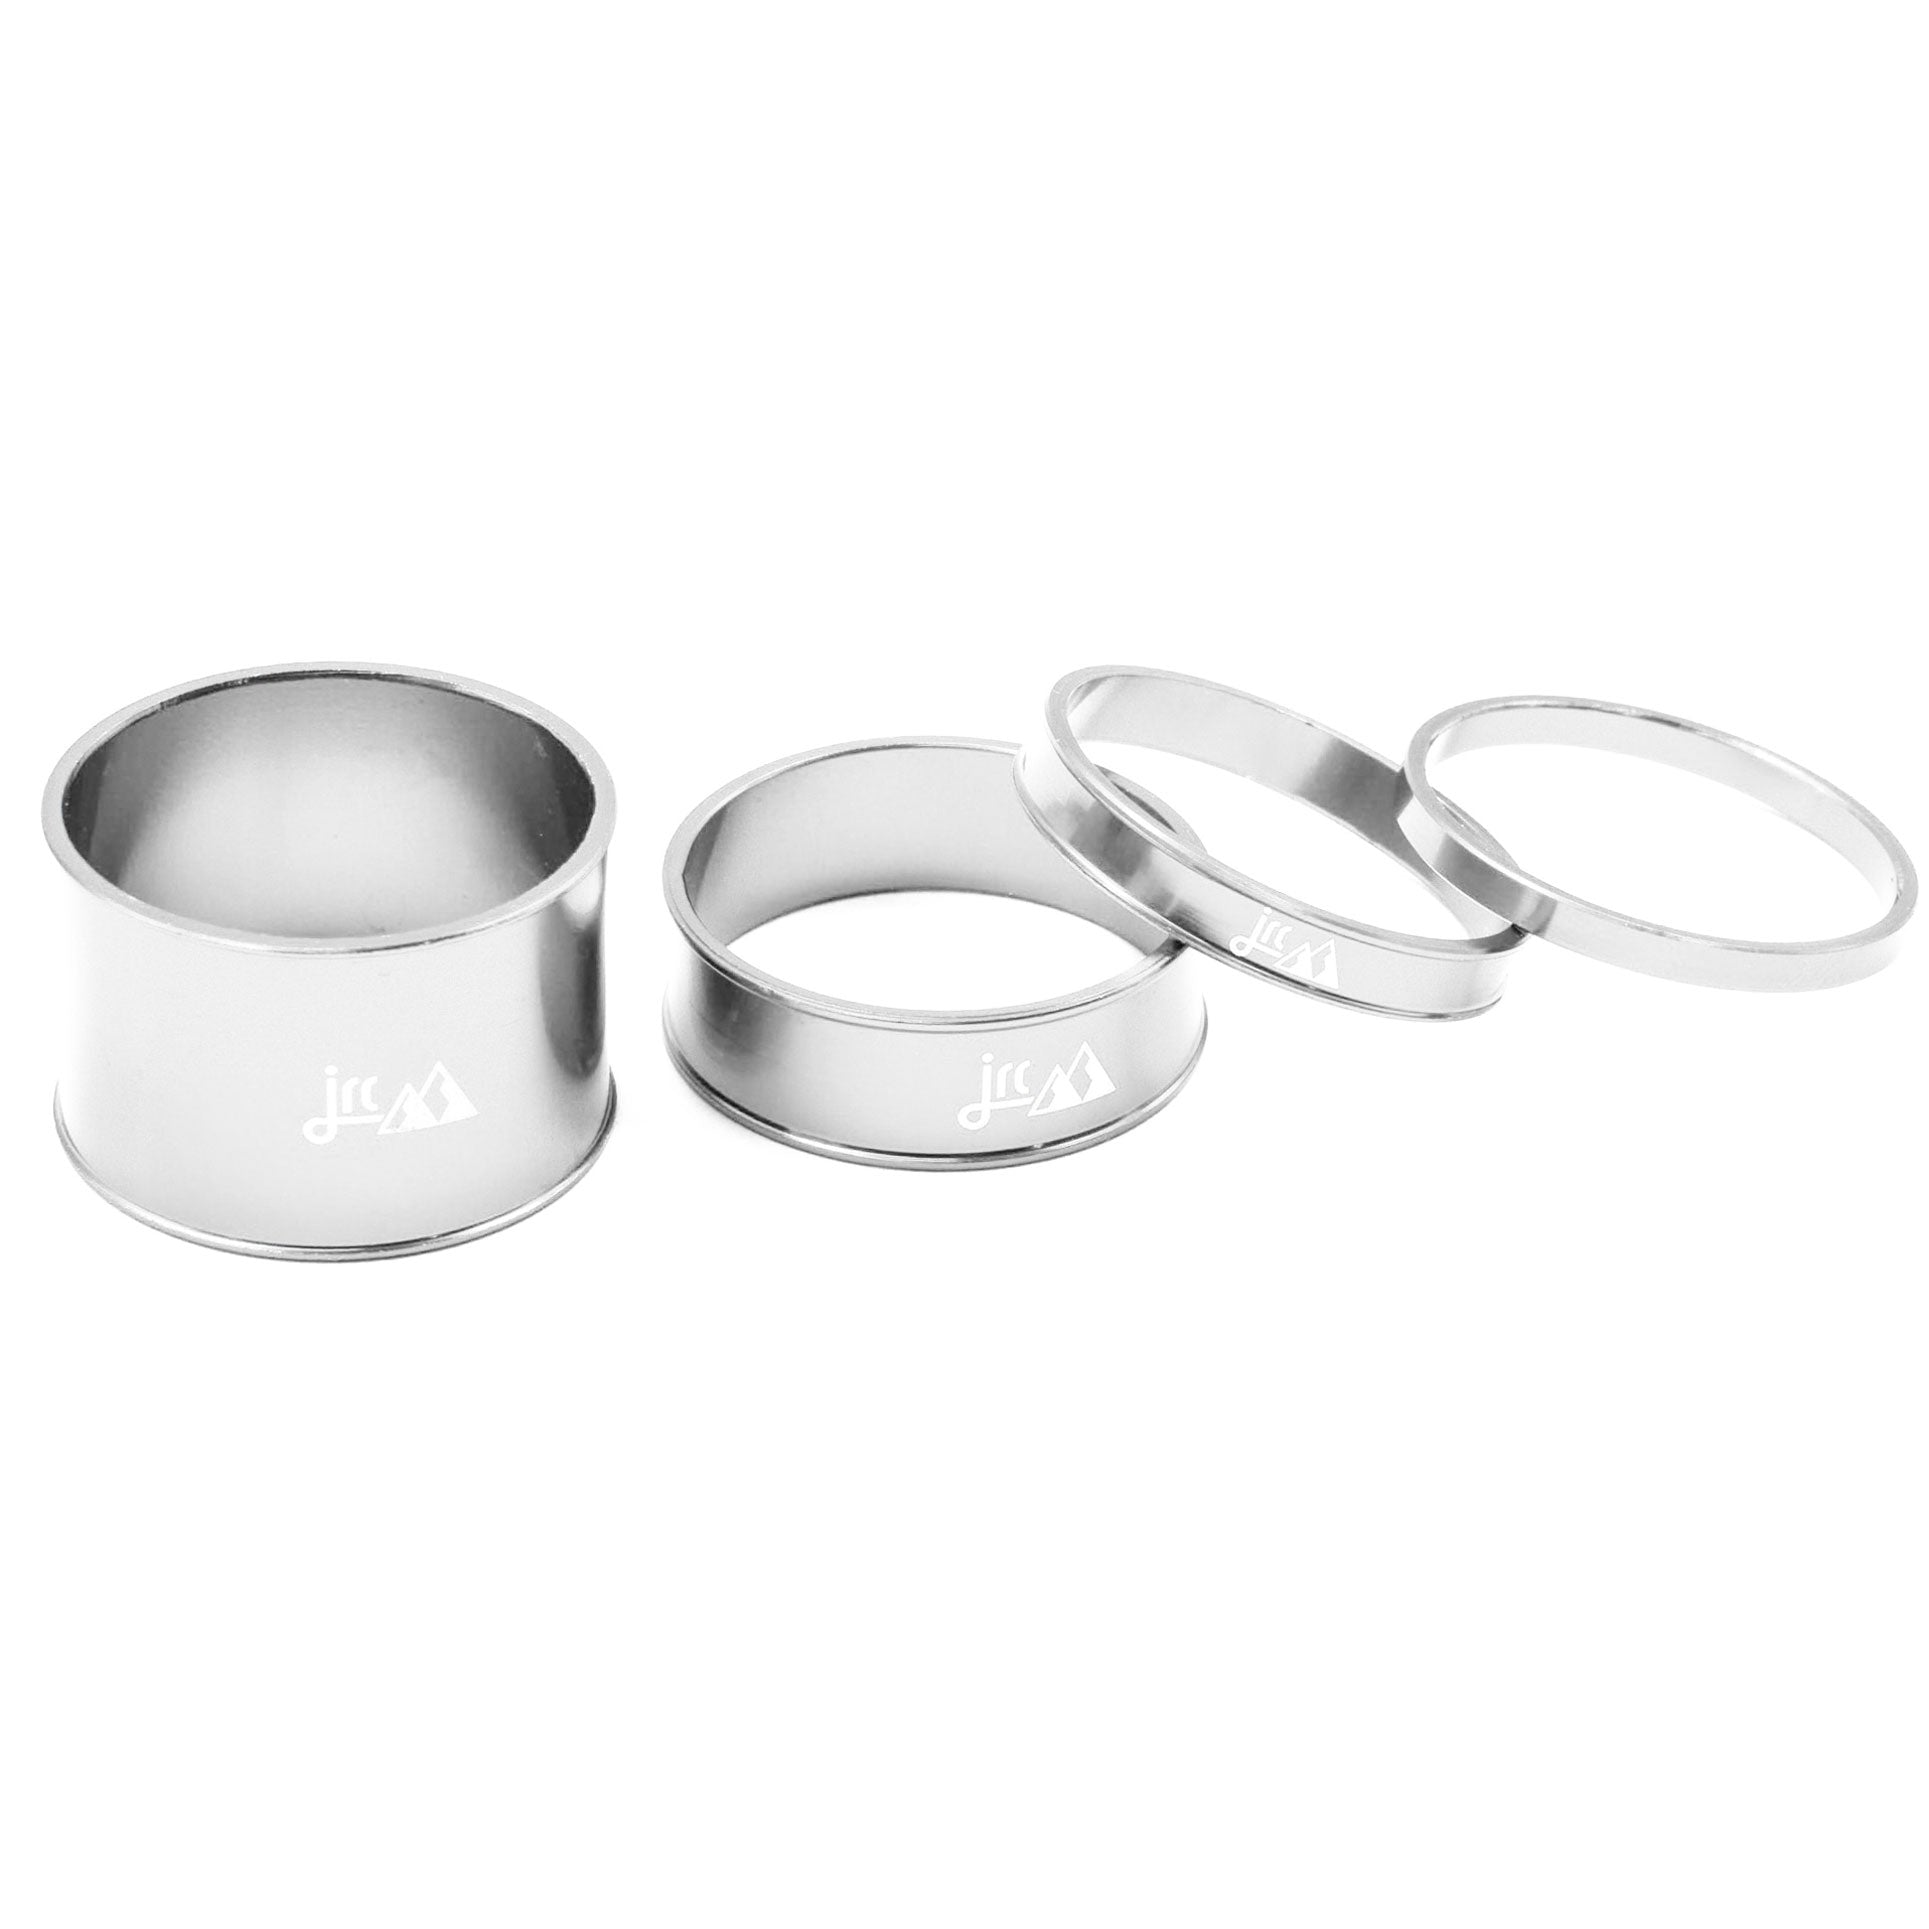 Silver, lightweight aluminium bicycle headset spacer kit with 4 sizes.